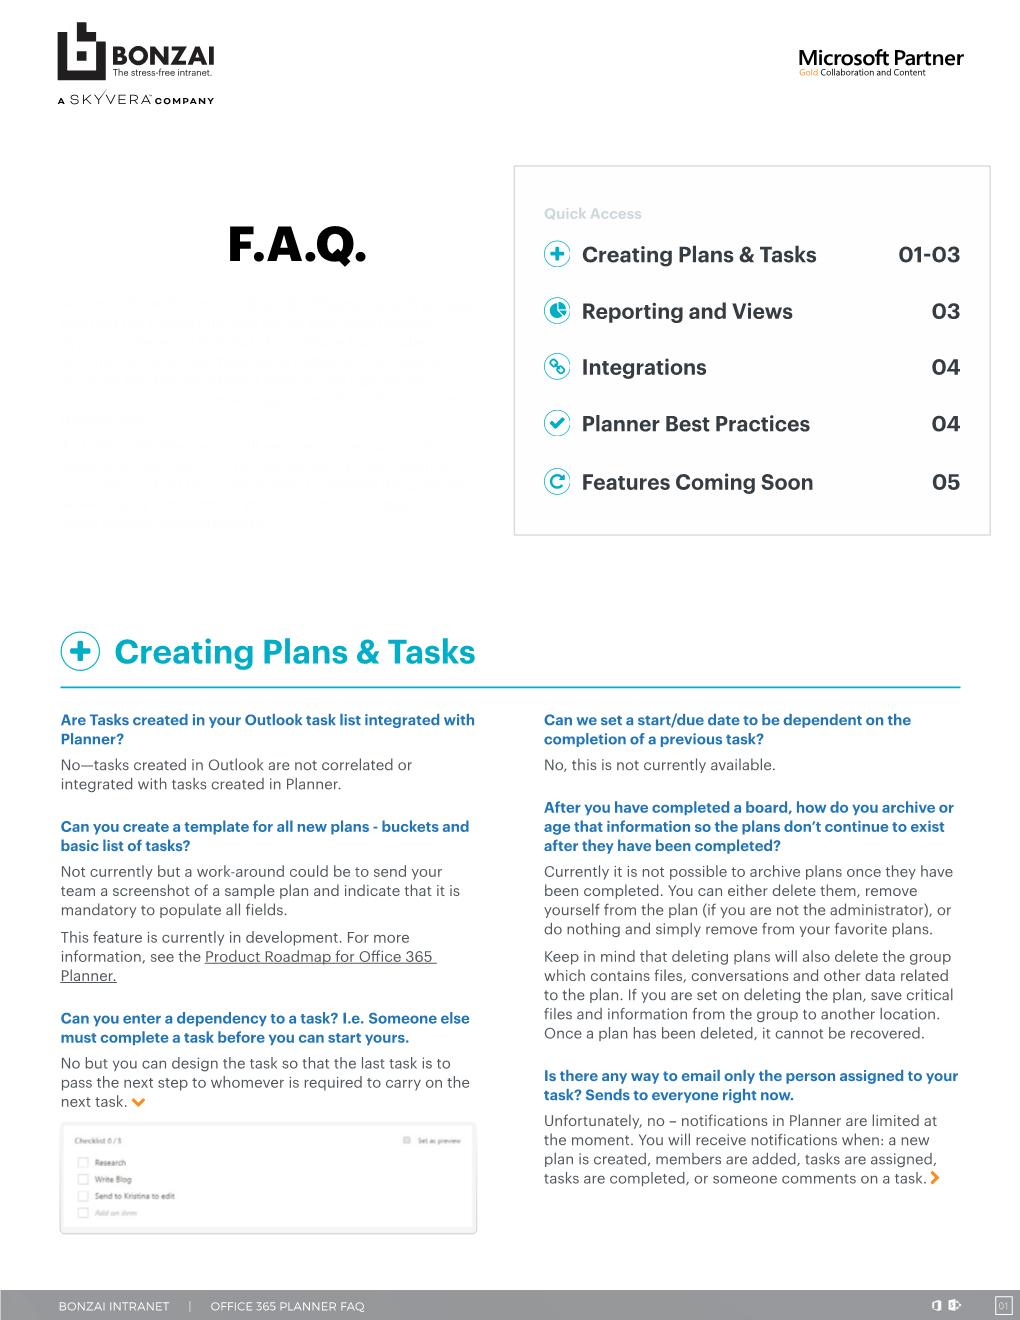 Office 365 Planner F.A.Q